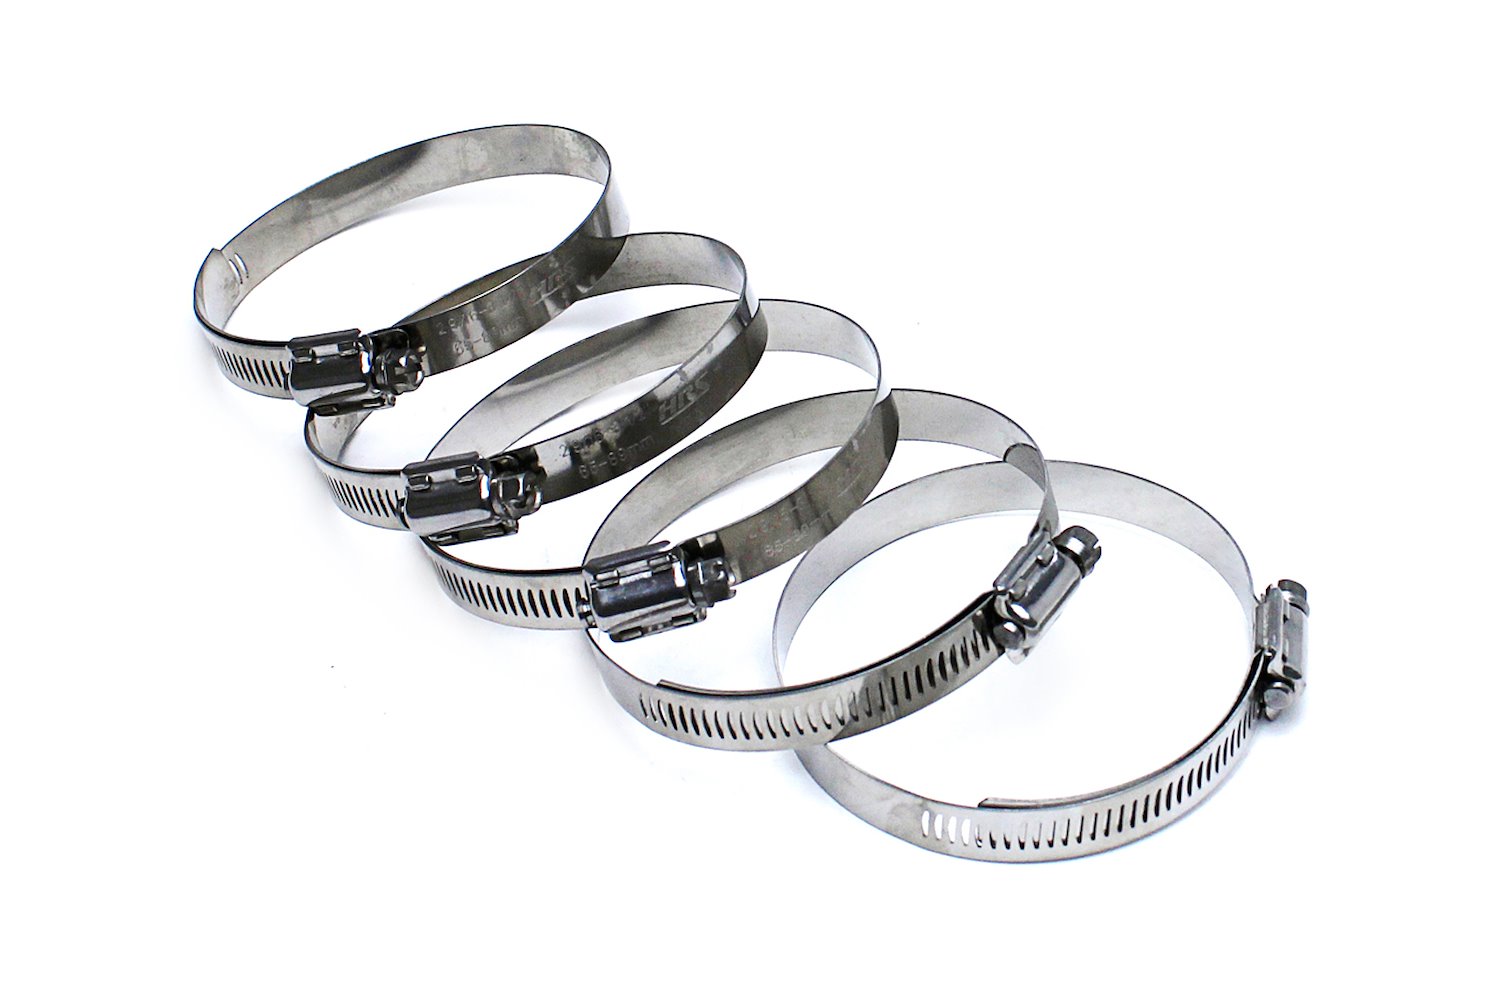 SSWC-91-114x5 Stainless Steel Worm Gear Hose Clamp, Effective Range: 3-9/16 in.- 4-1/2 in., 5Pc